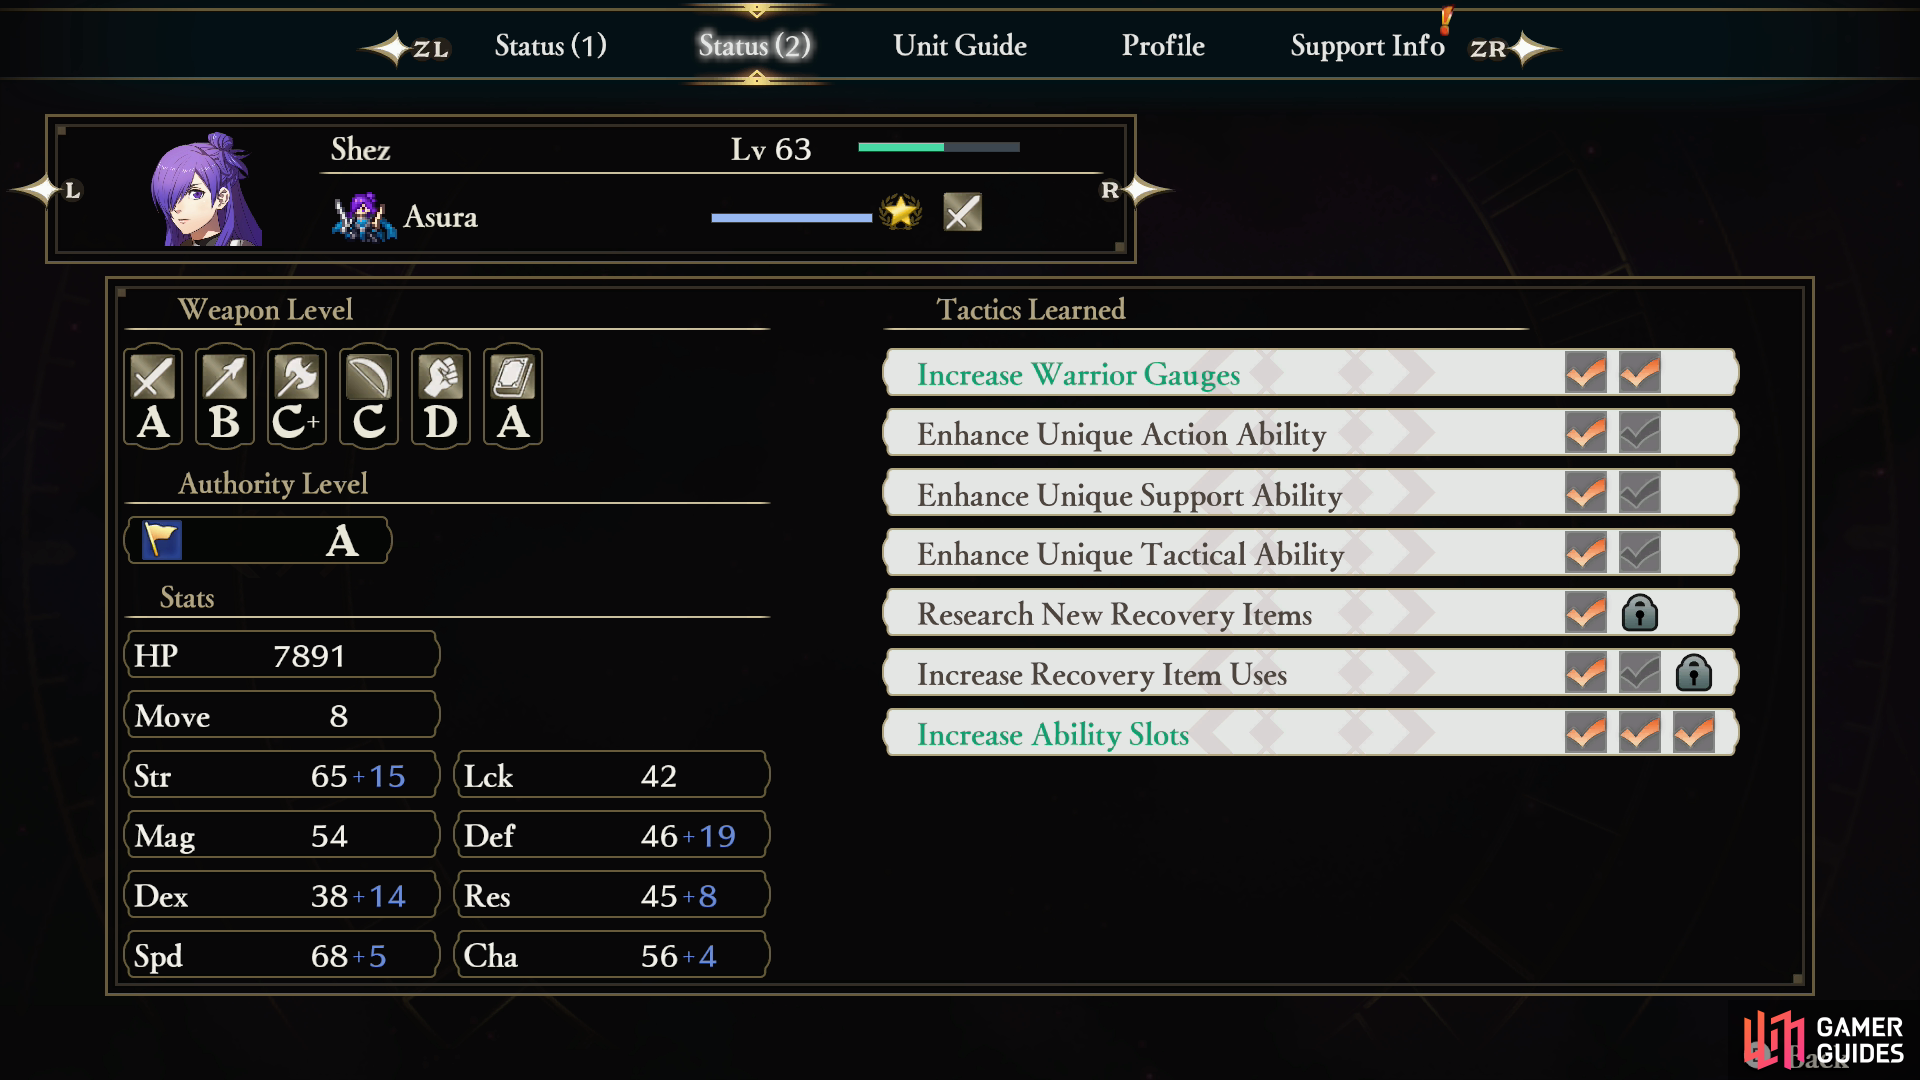 Having an Adjutant assigned will boost a character's stats. The stats boosted and the magnitude of the boost varies by the class of the Adjutant and their Support Rank.